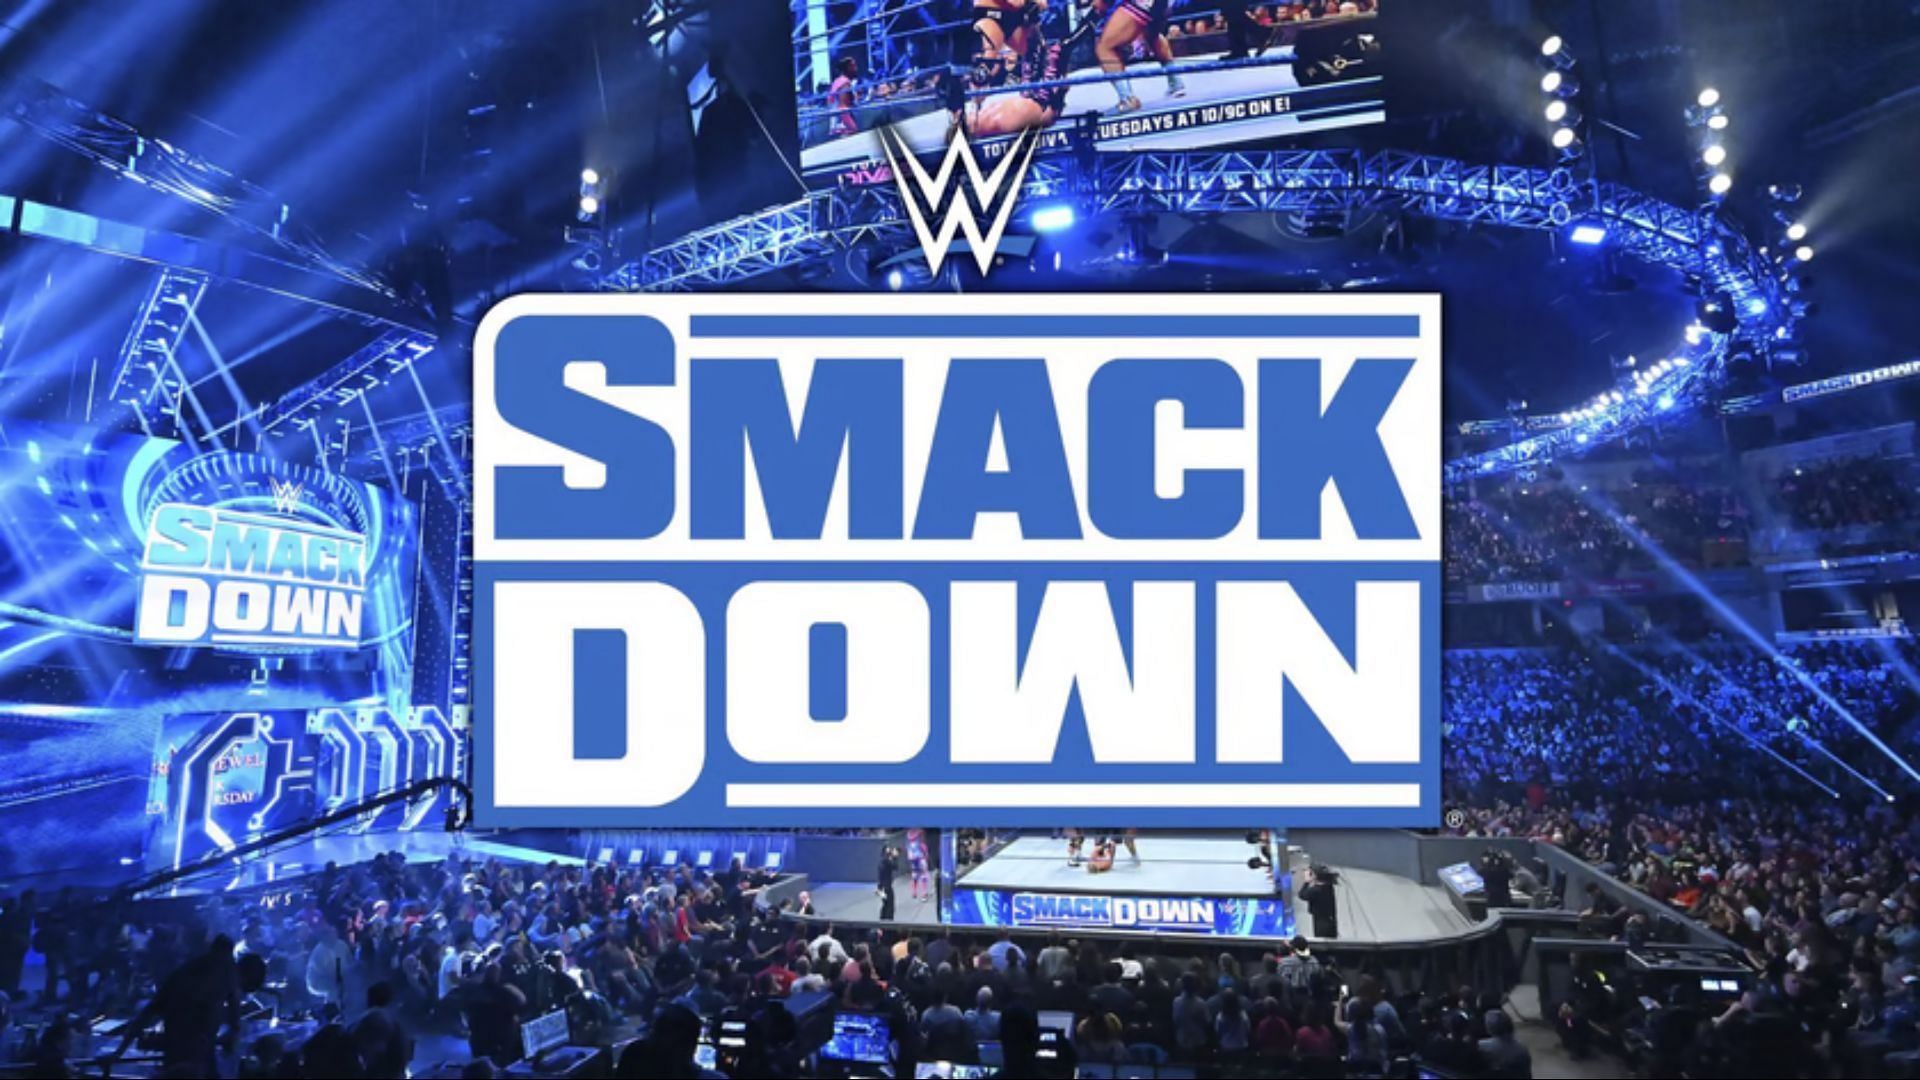 Friday Night SmackDown features some of WWE